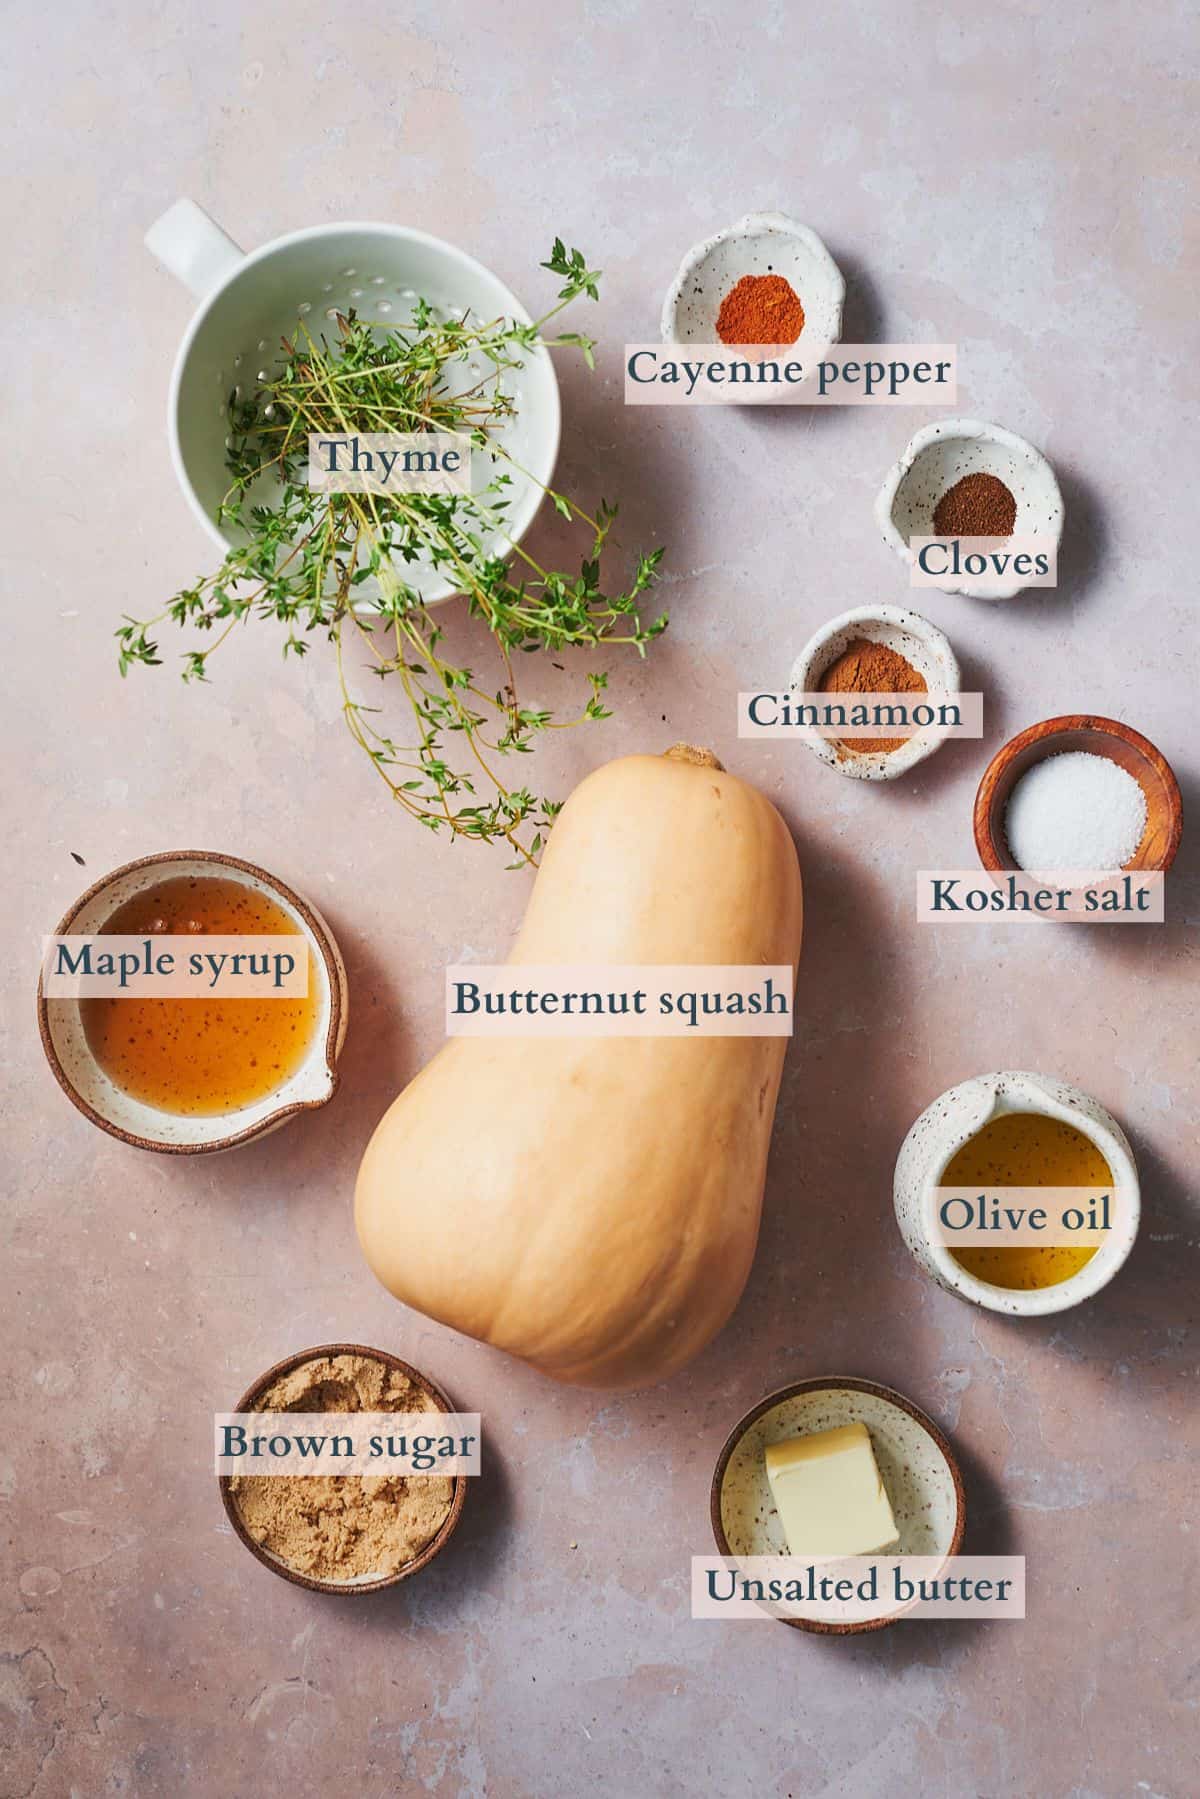 Ingredients to make roasted butternut squash with brown sugar laid out on a table and labeled to denote each ingredient.